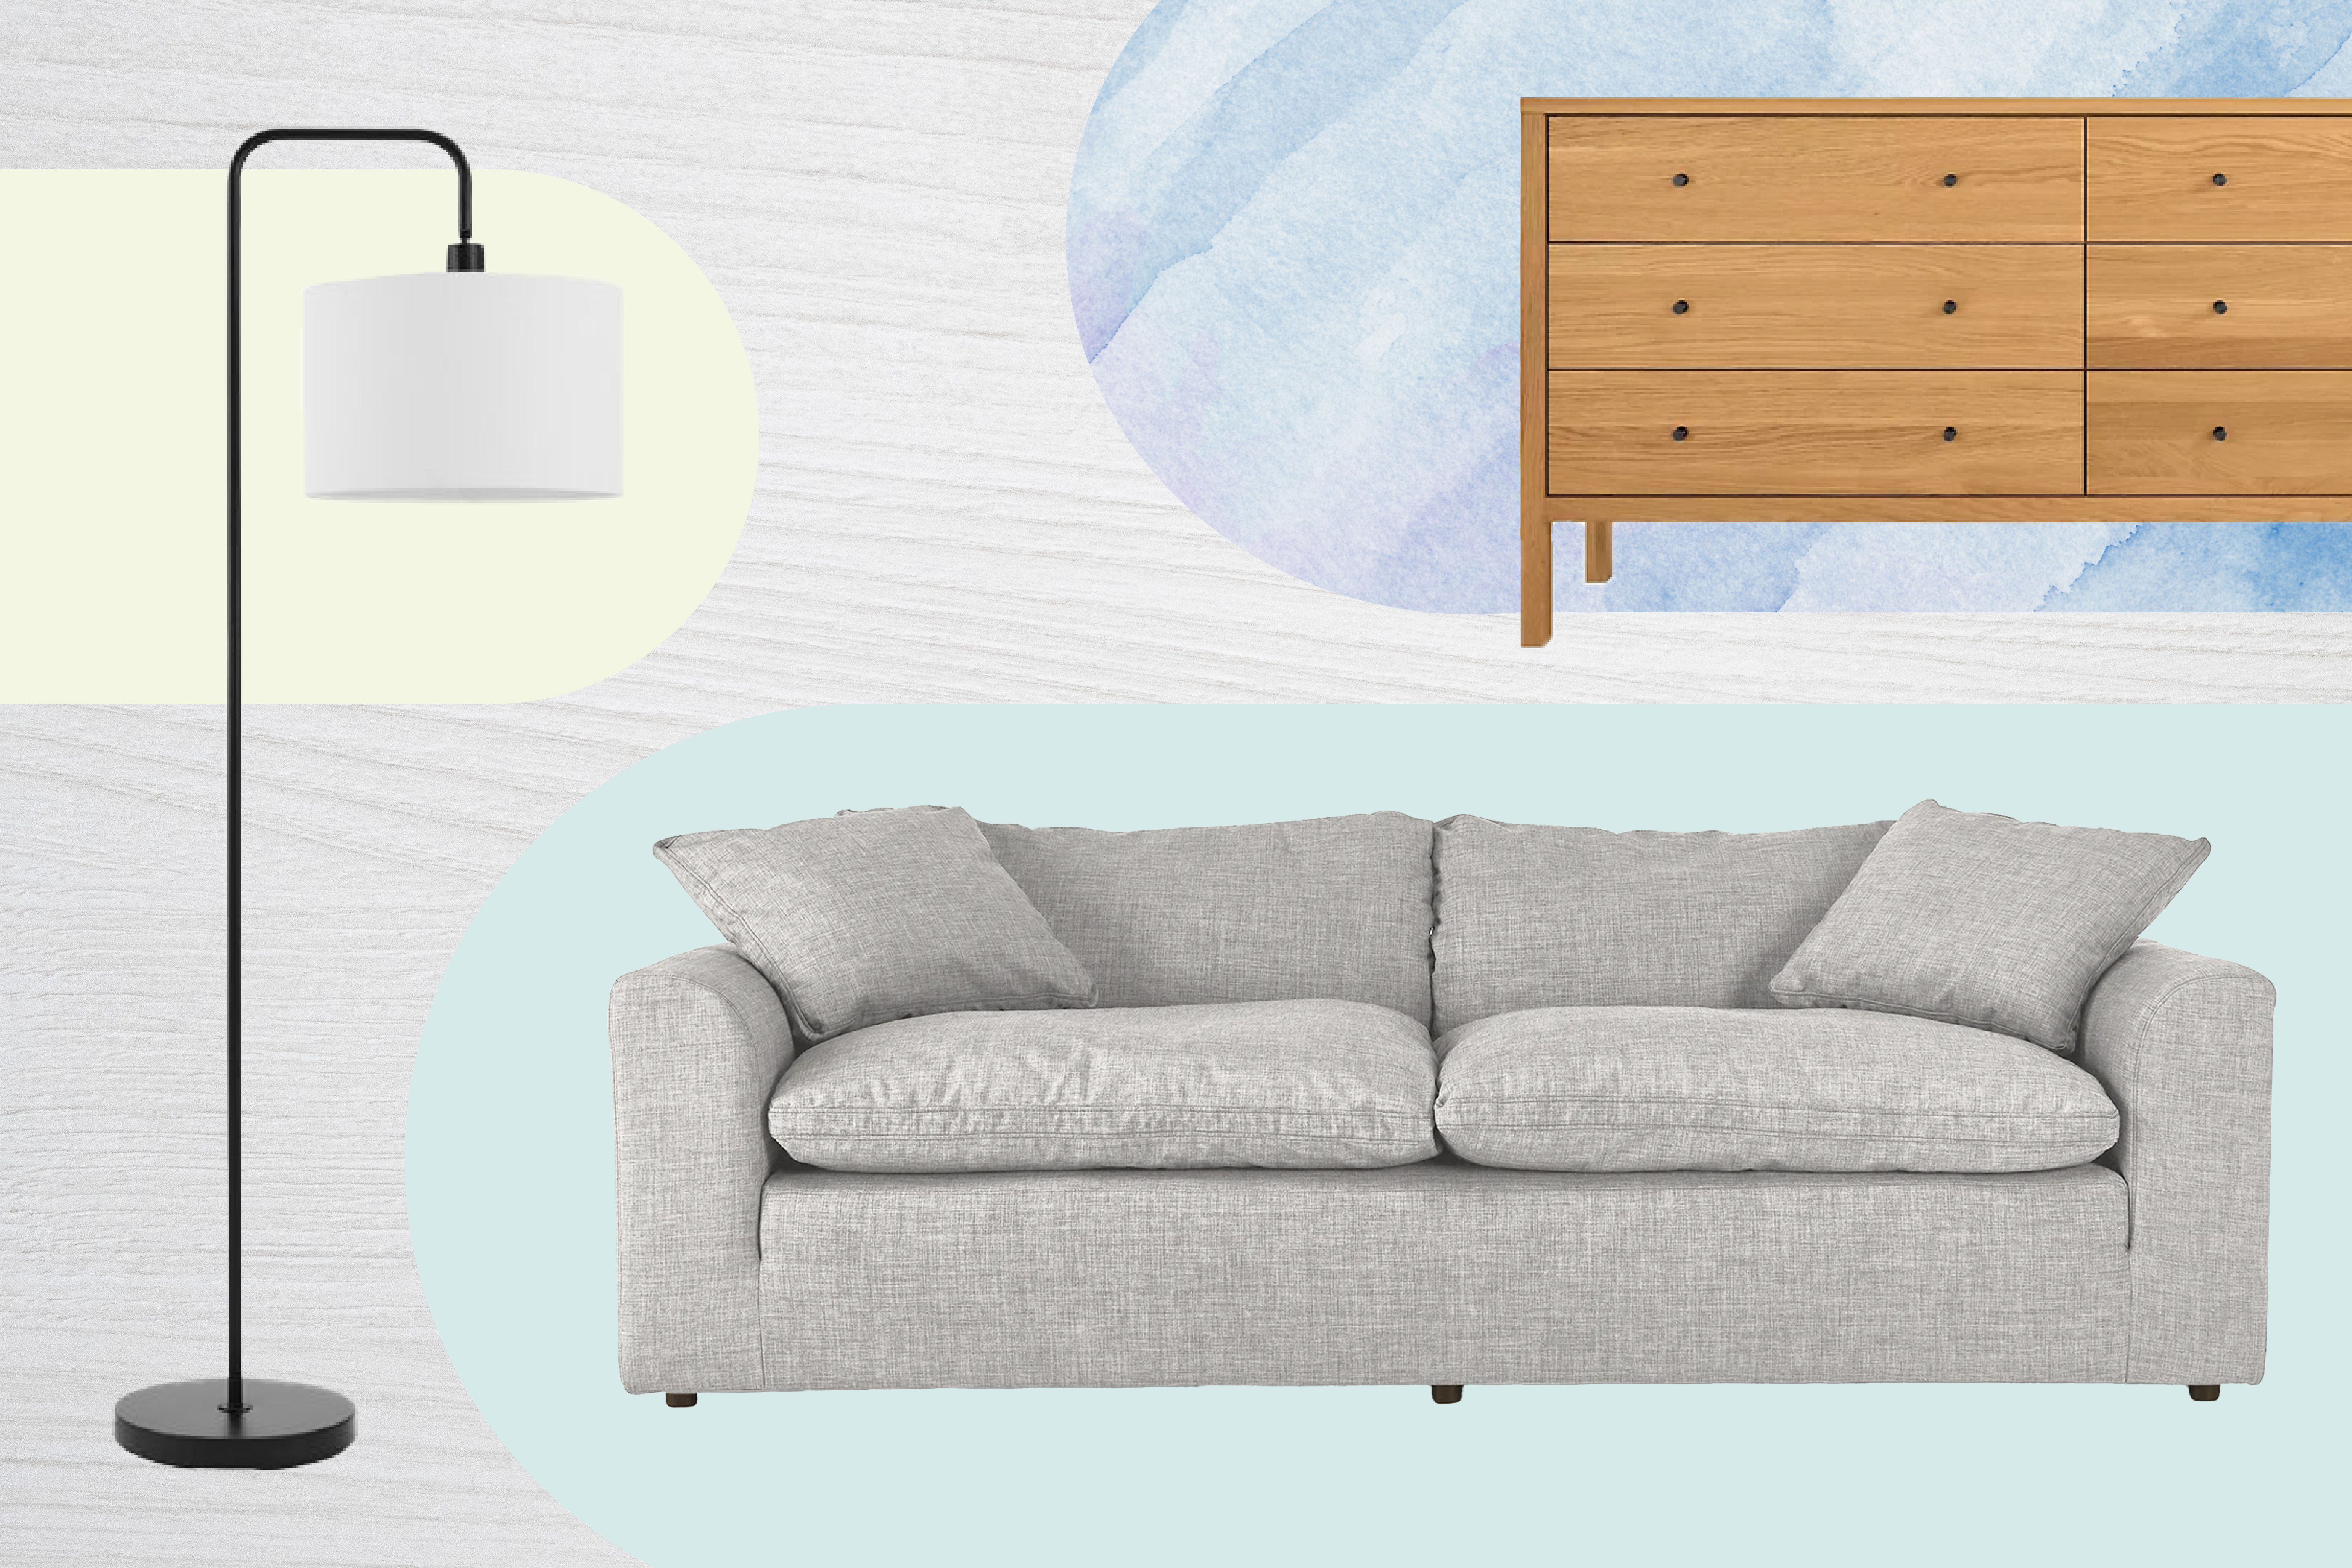 The Best Early Black Friday Furniture Deals to Shop Right Now